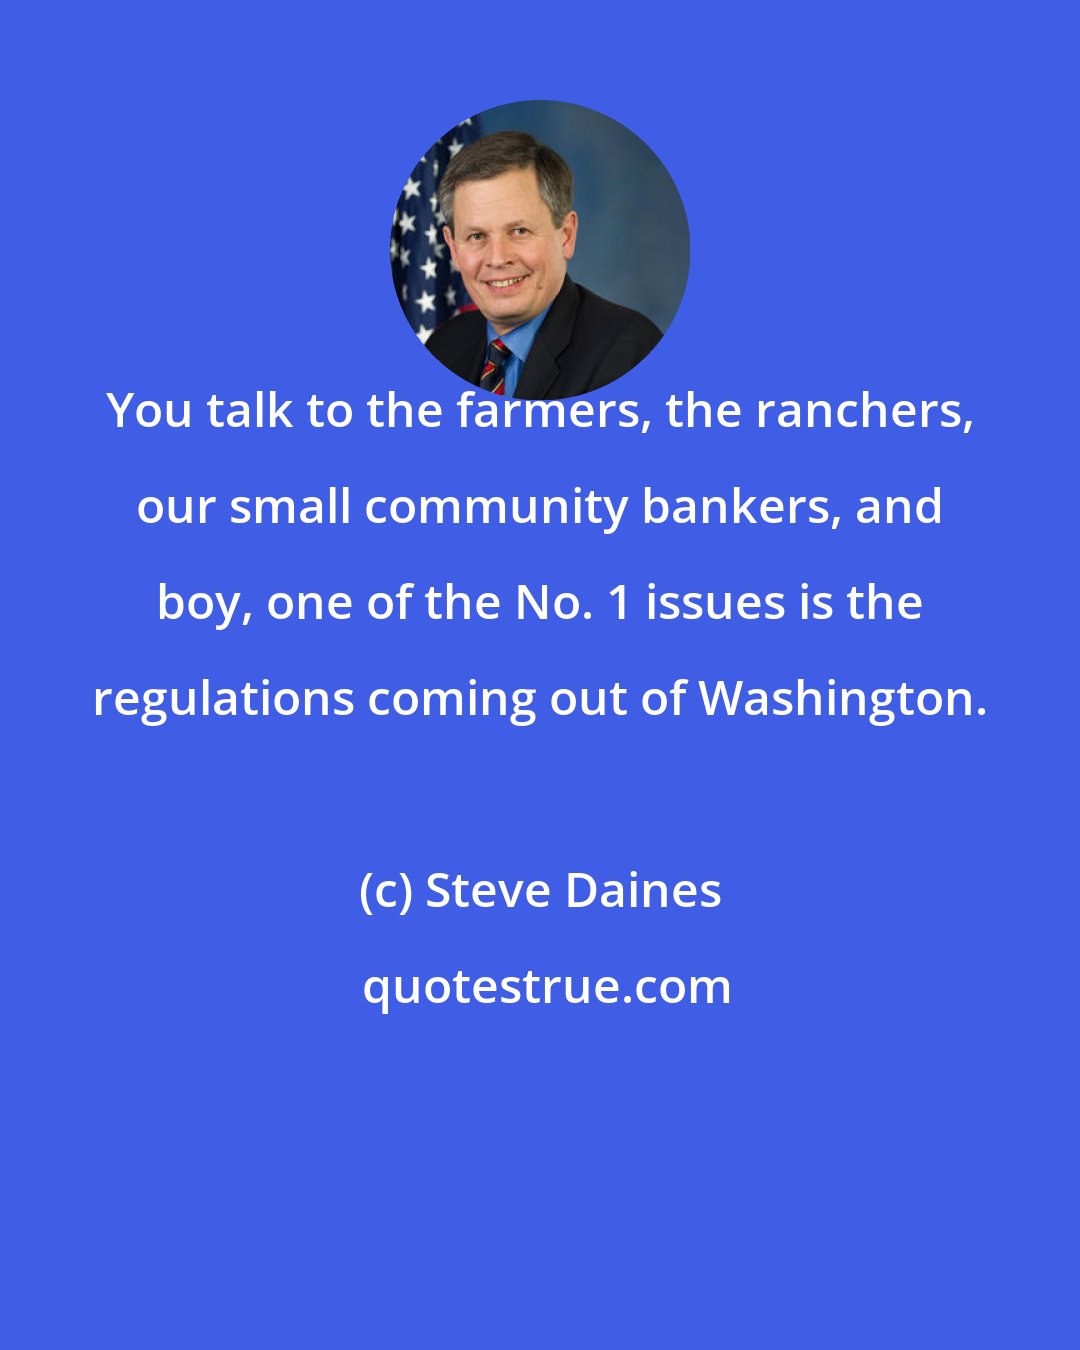 Steve Daines: You talk to the farmers, the ranchers, our small community bankers, and boy, one of the No. 1 issues is the regulations coming out of Washington.